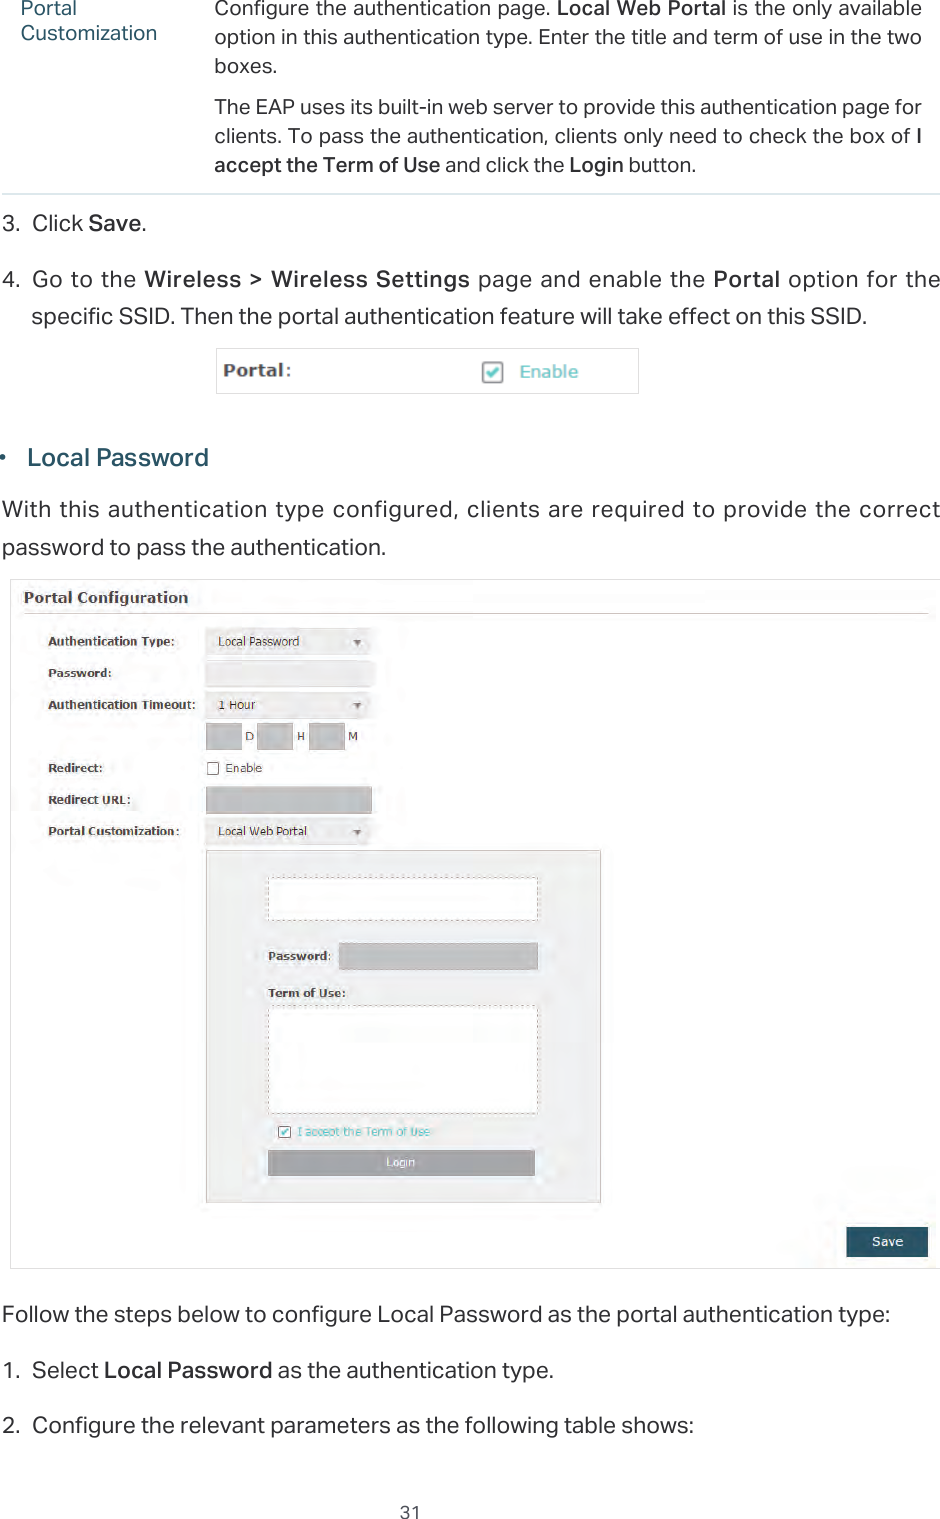  31Portal CustomizationConfigure the authentication page. Local Web Portal is the only available option in this authentication type. Enter the title and term of use in the two boxes.The EAP uses its built-in web server to provide this authentication page for clients. To pass the authentication, clients only need to check the box of I accept the Term of Use and click the Login button.3. Click Save.4. Go to the Wireless &gt; Wireless  Settings page and enable the Portal option for the specific SSID. Then the portal authentication feature will take effect on this SSID. ·Local PasswordWith this authentication type configured, clients are required to provide the correct password to pass the authentication.Follow the steps below to configure Local Password as the portal authentication type:1. Select Local Password as the authentication type.2. Configure the relevant parameters as the following table shows: